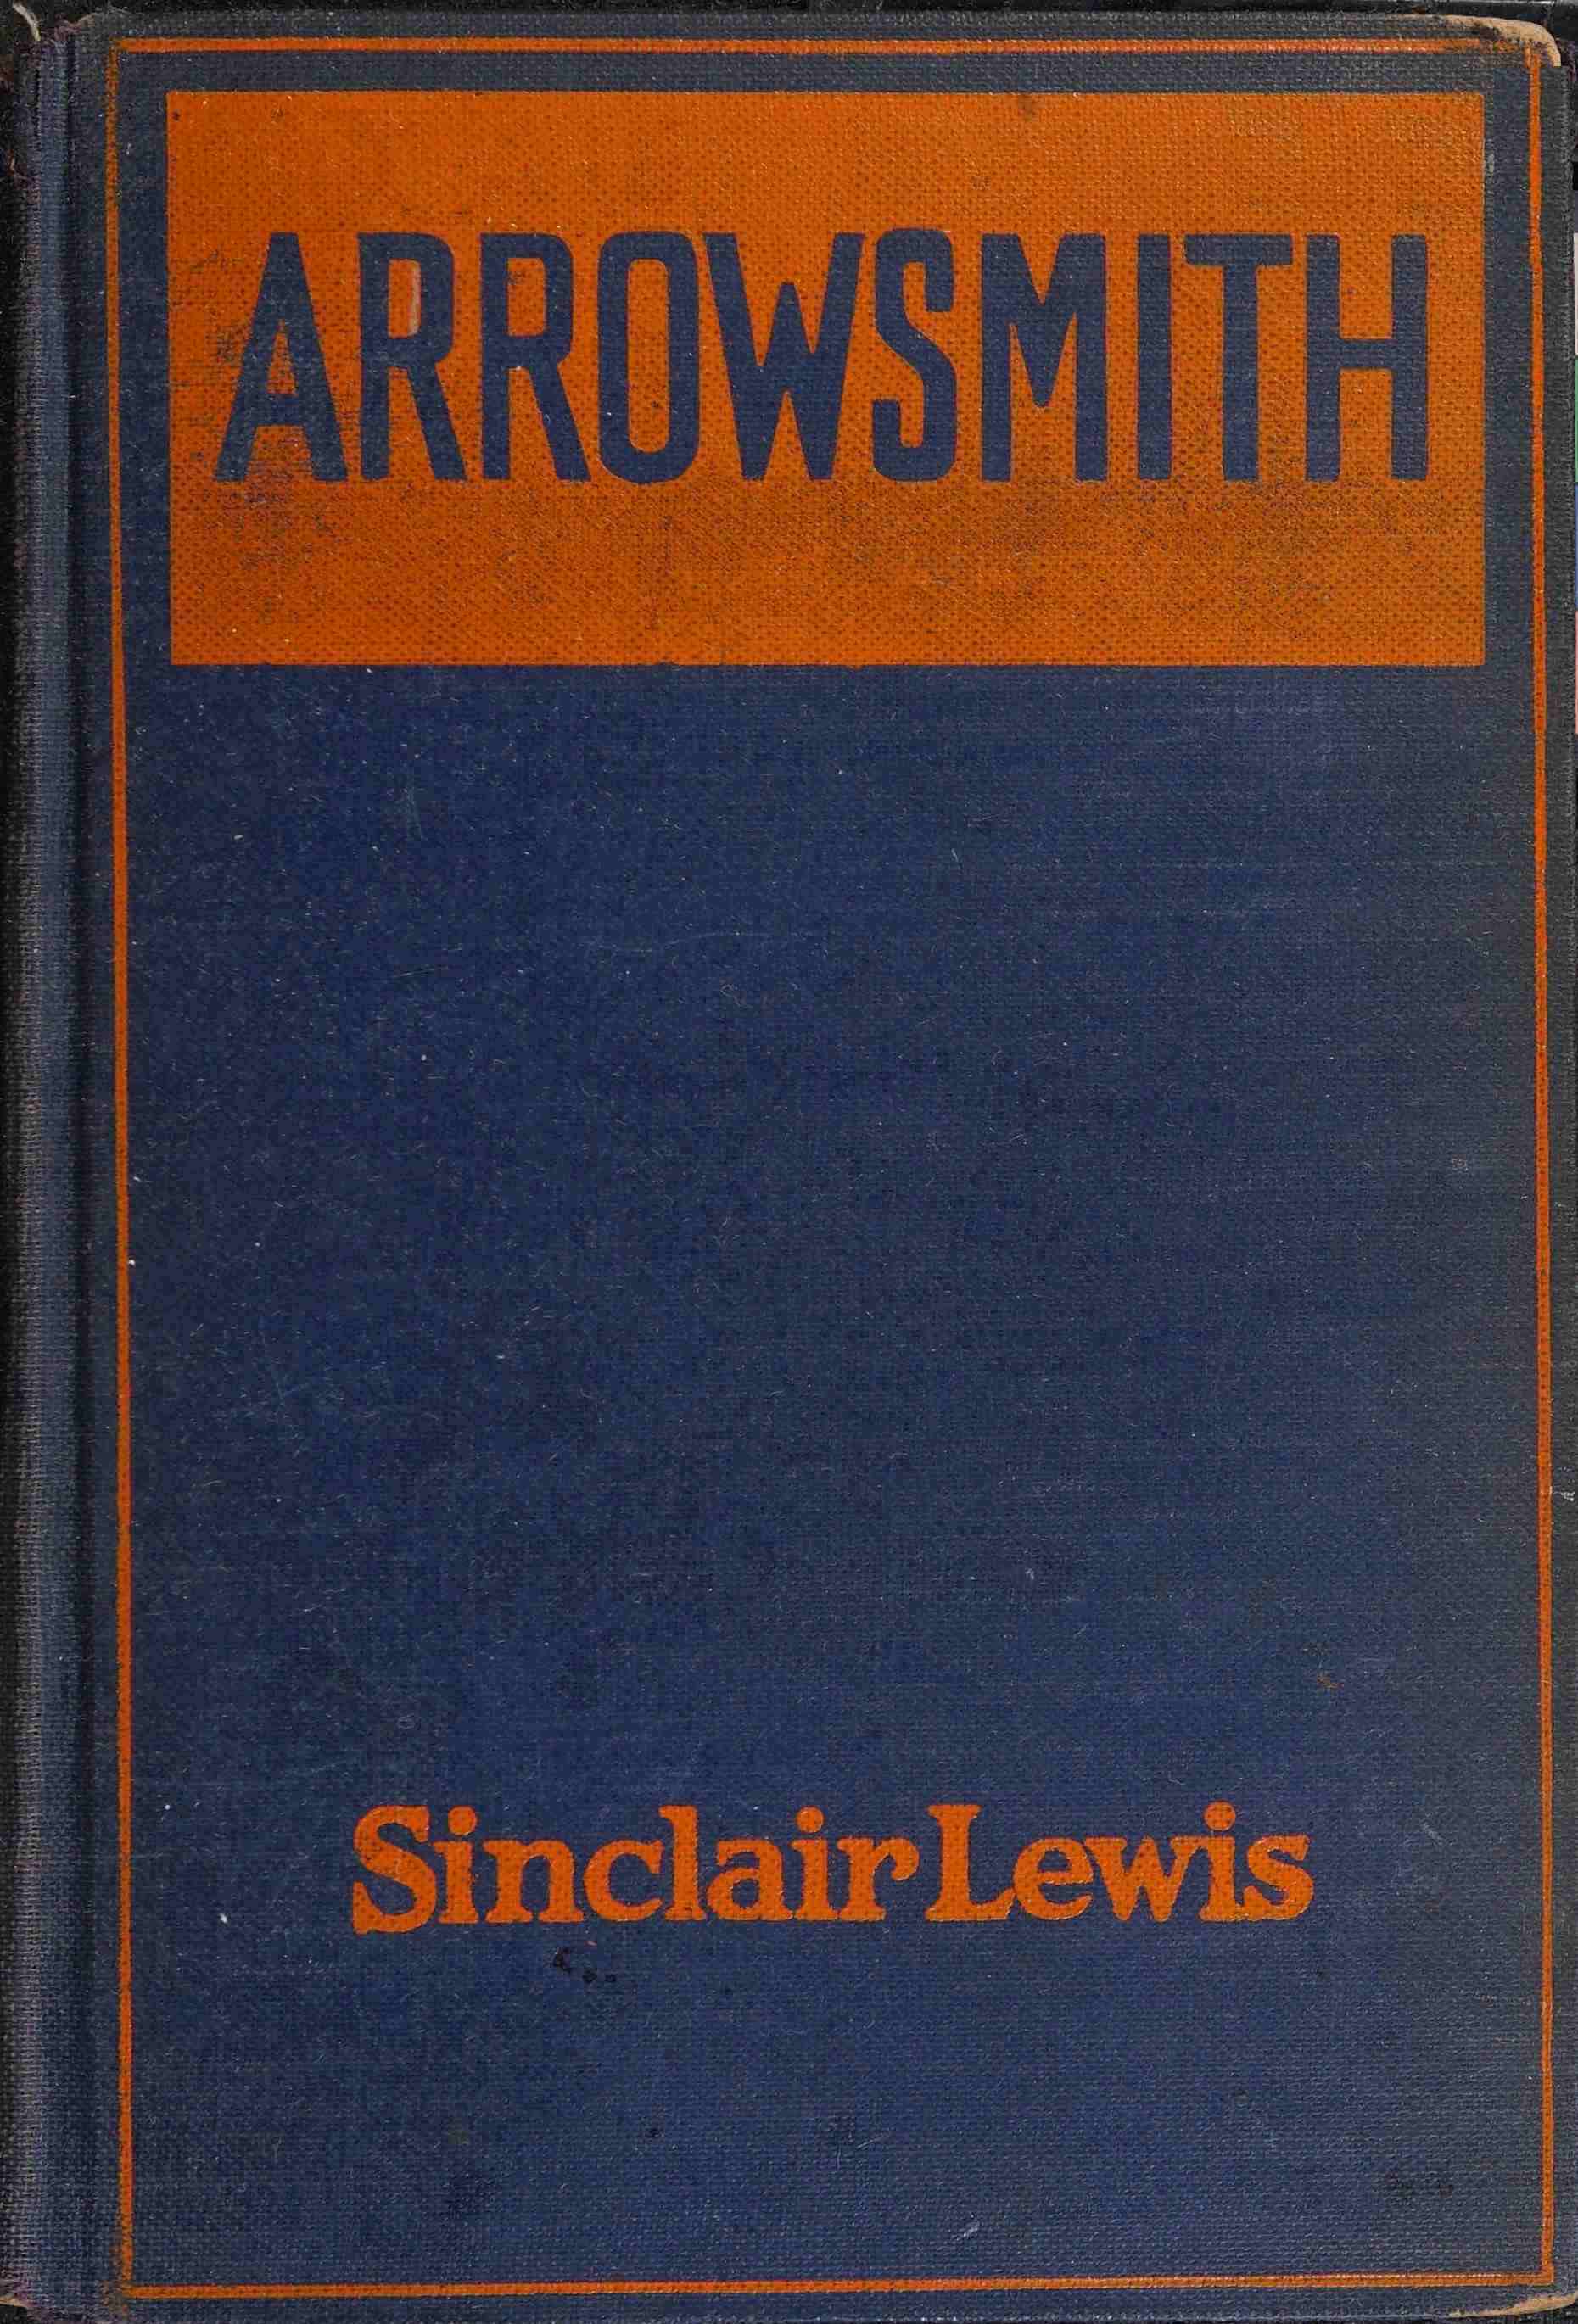 The Project Gutenberg eBook of Arrowsmith, by Sinclair Lewis.